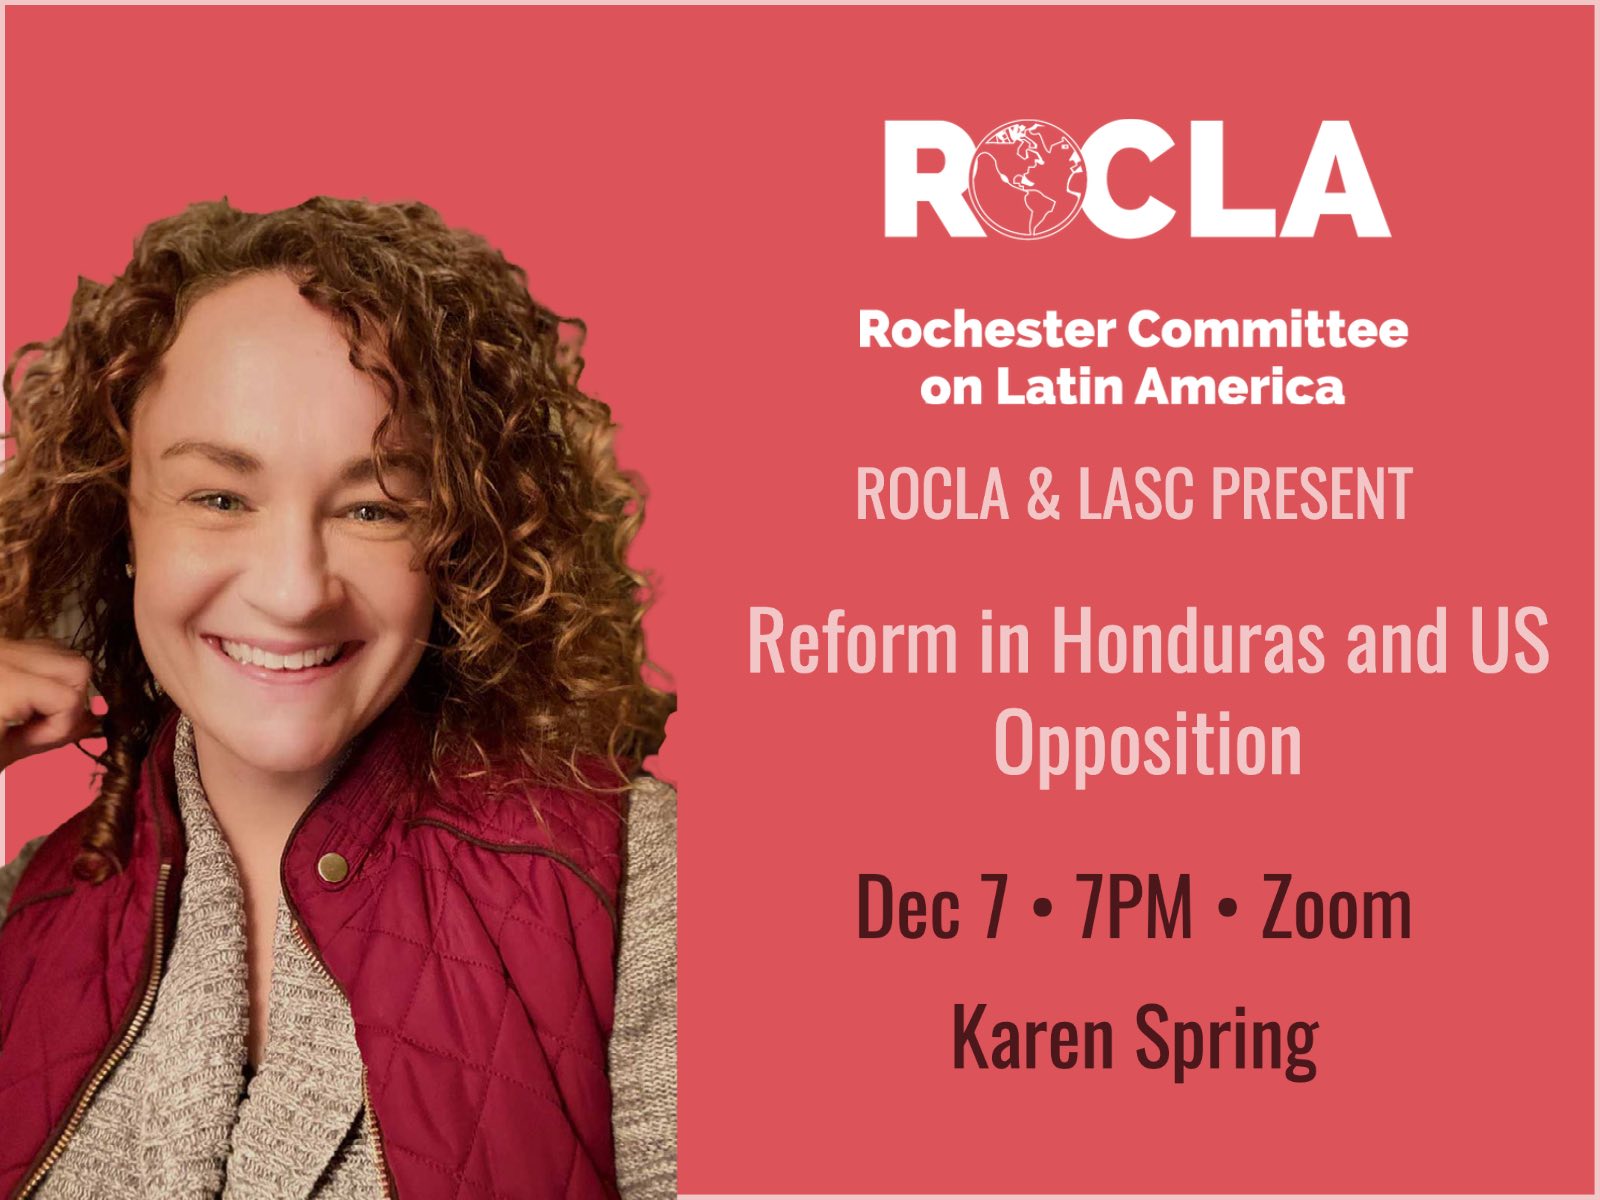 ROCLA Dec 2022 - Reform in Honduras and US Opposition at 7PM with Karen Spring